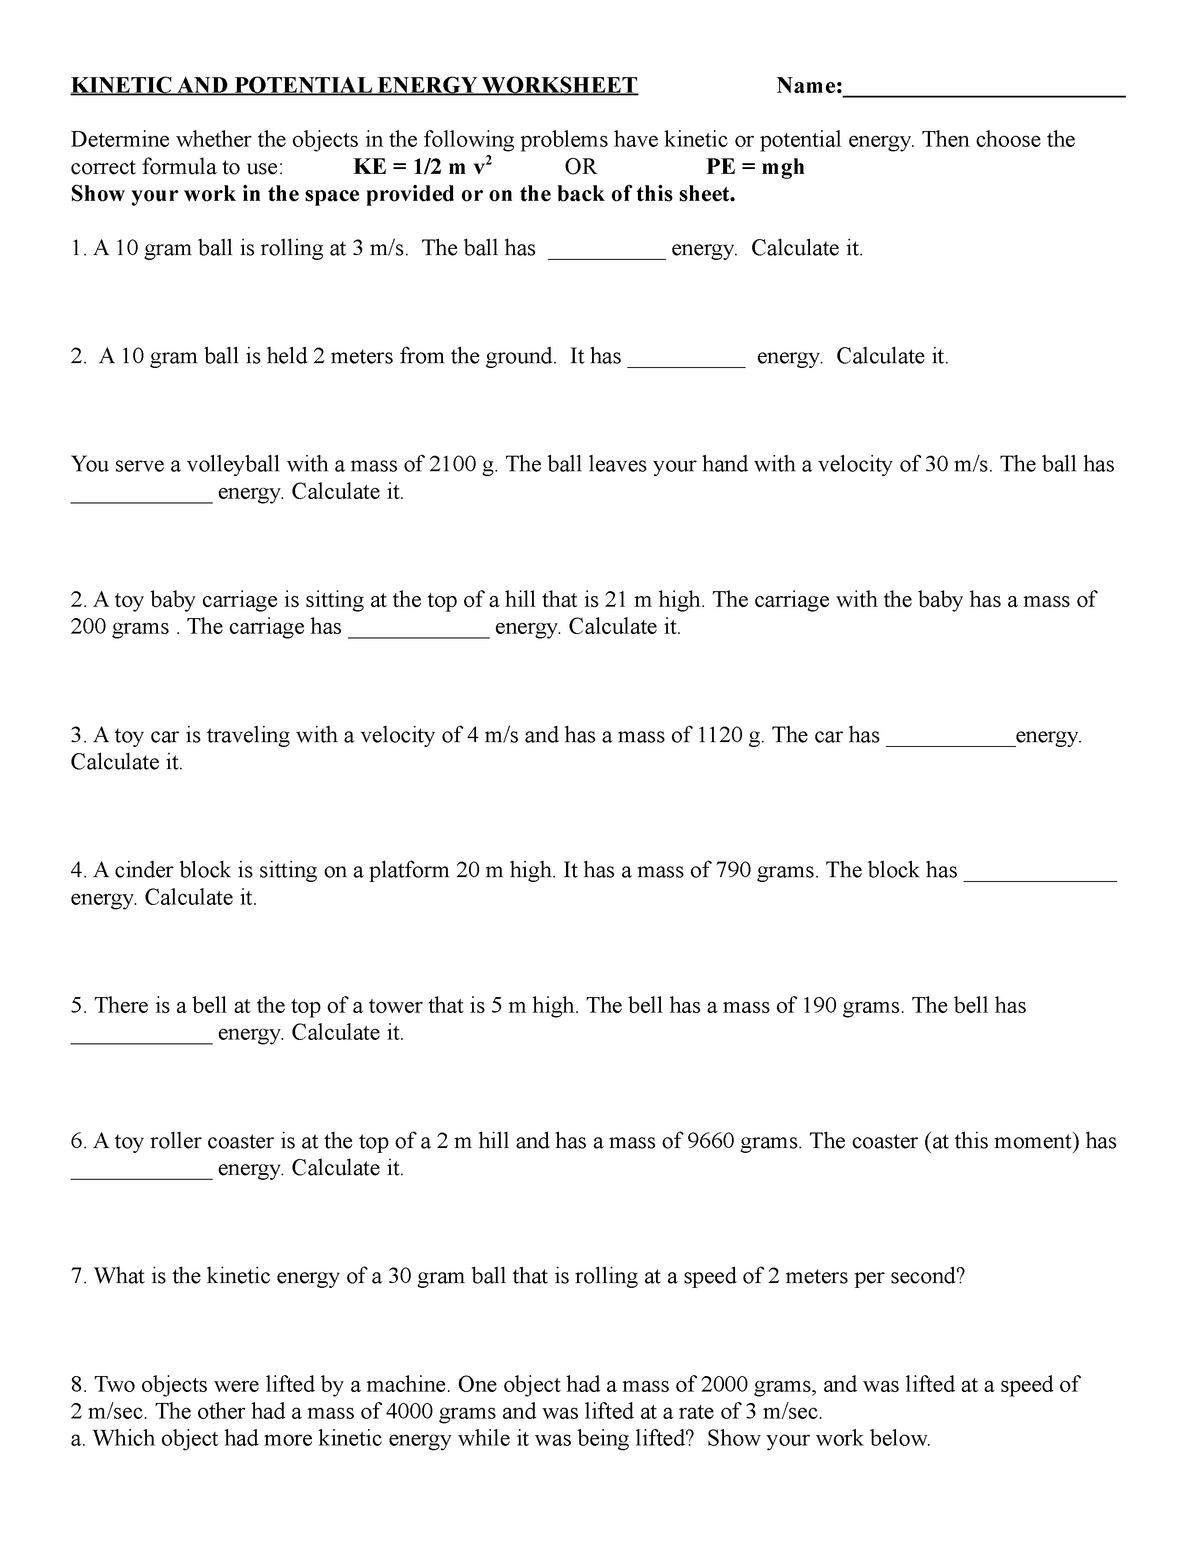 Calculating kinetic and potential energy - KINETIC AND POTENTIAL Throughout Work And Energy Worksheet